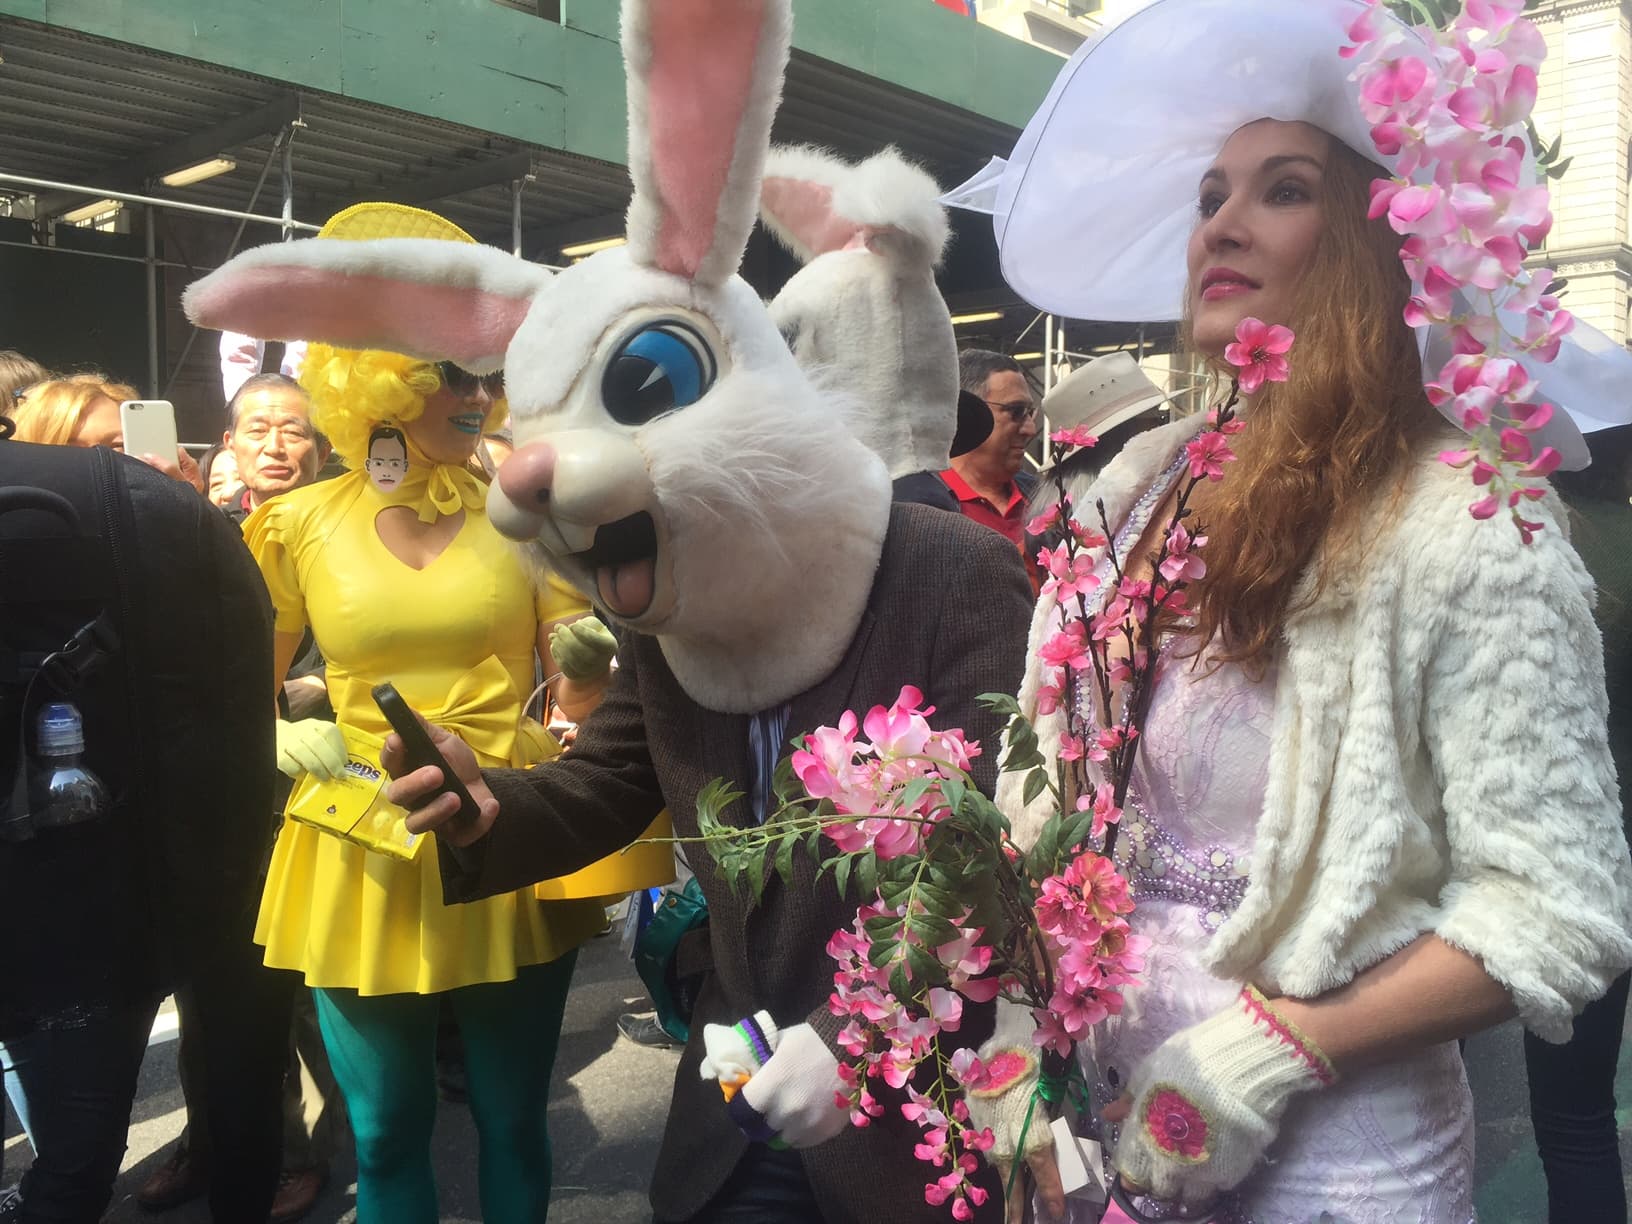 The NYC Easter Parade – Bunnies, Bonnets, and More